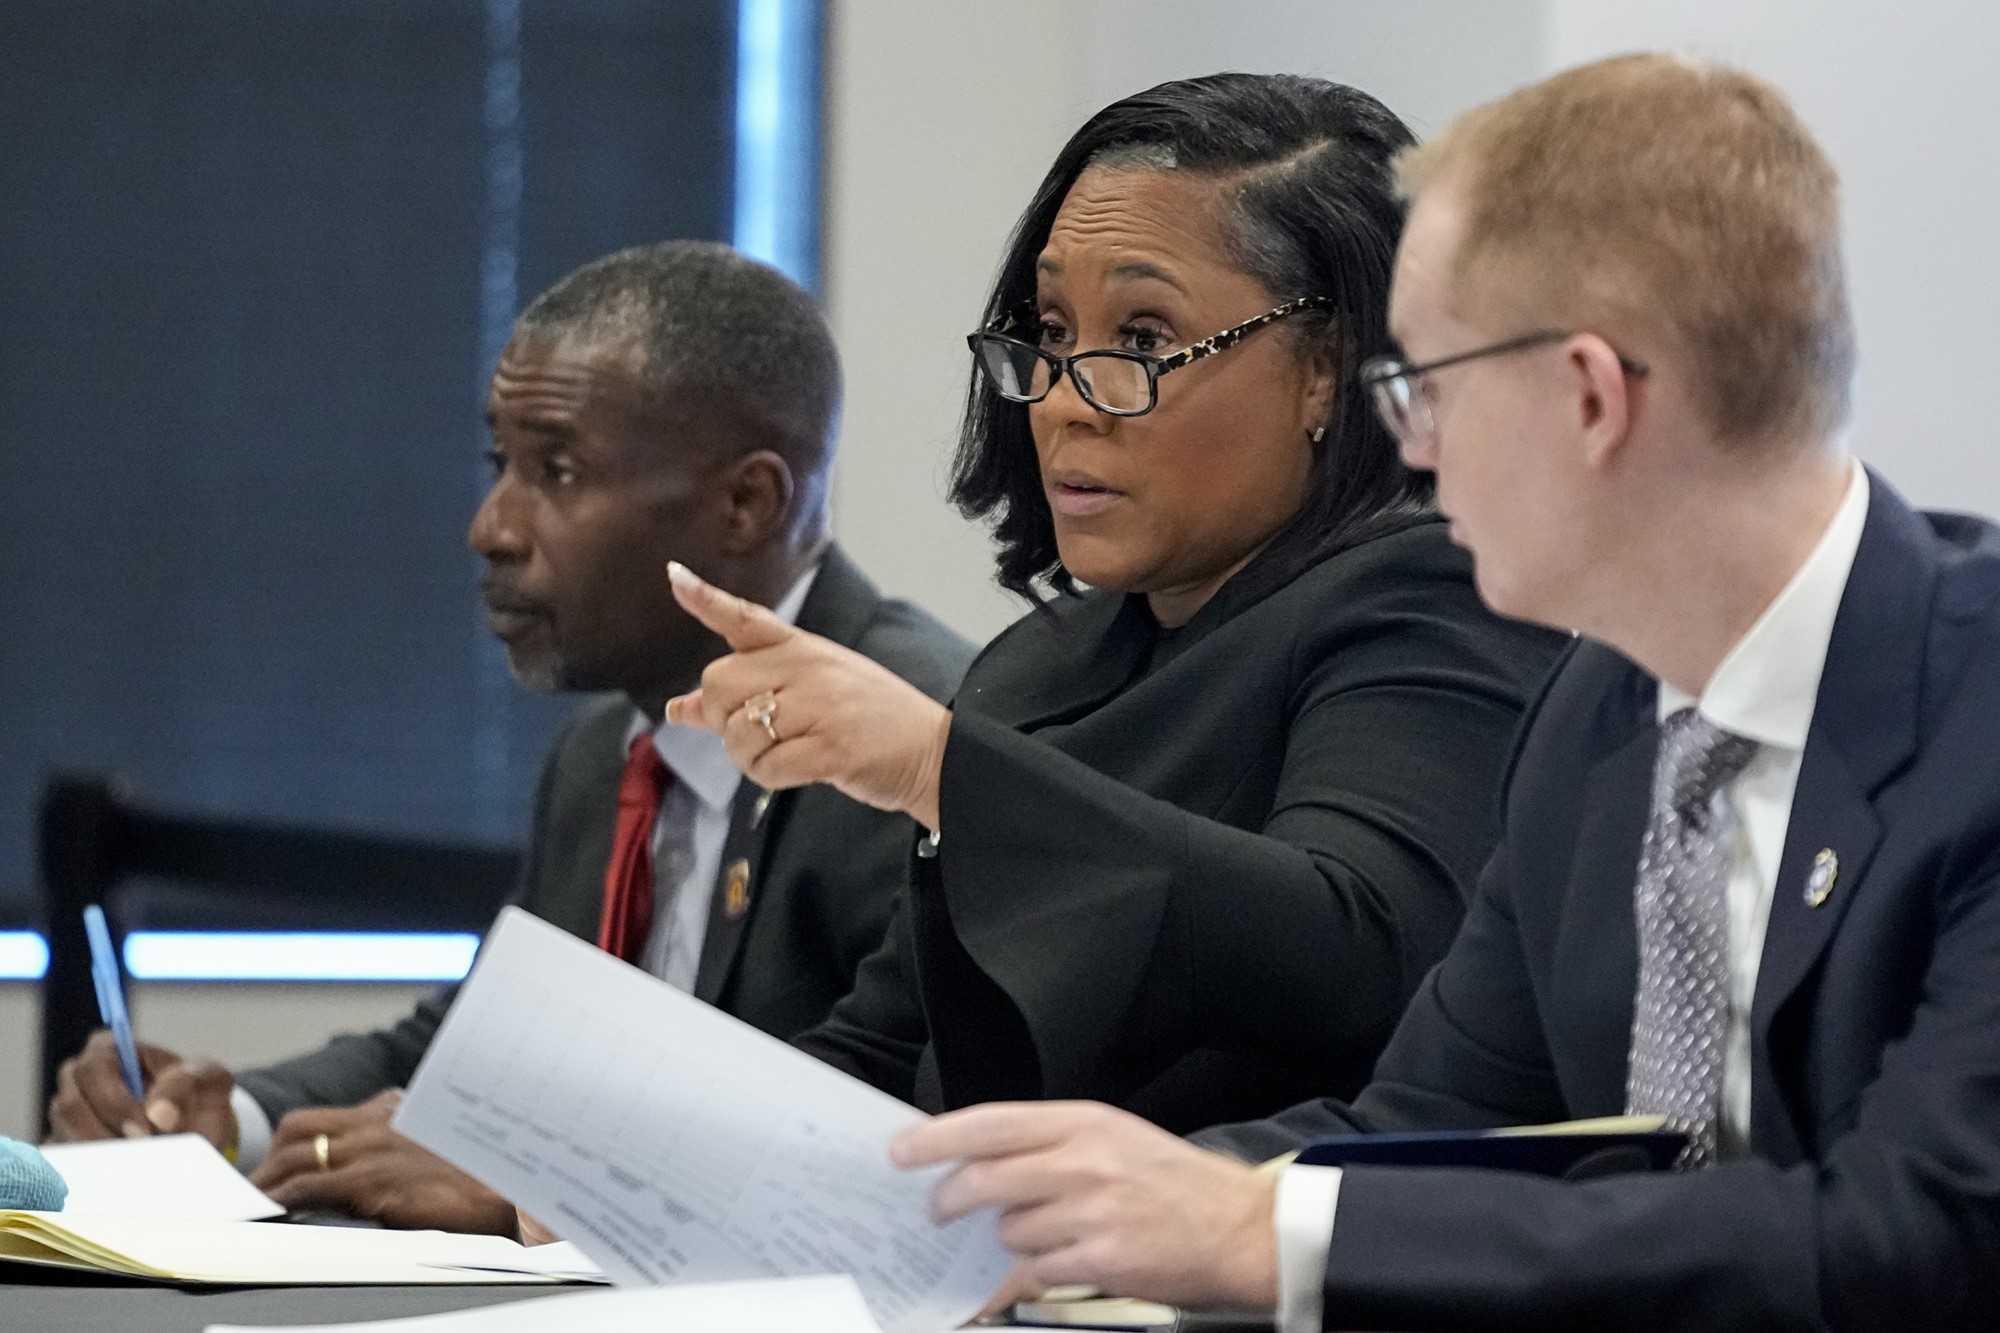 A black woman in glasses and a suit sits between two men at a table, speaking and pointing into a room